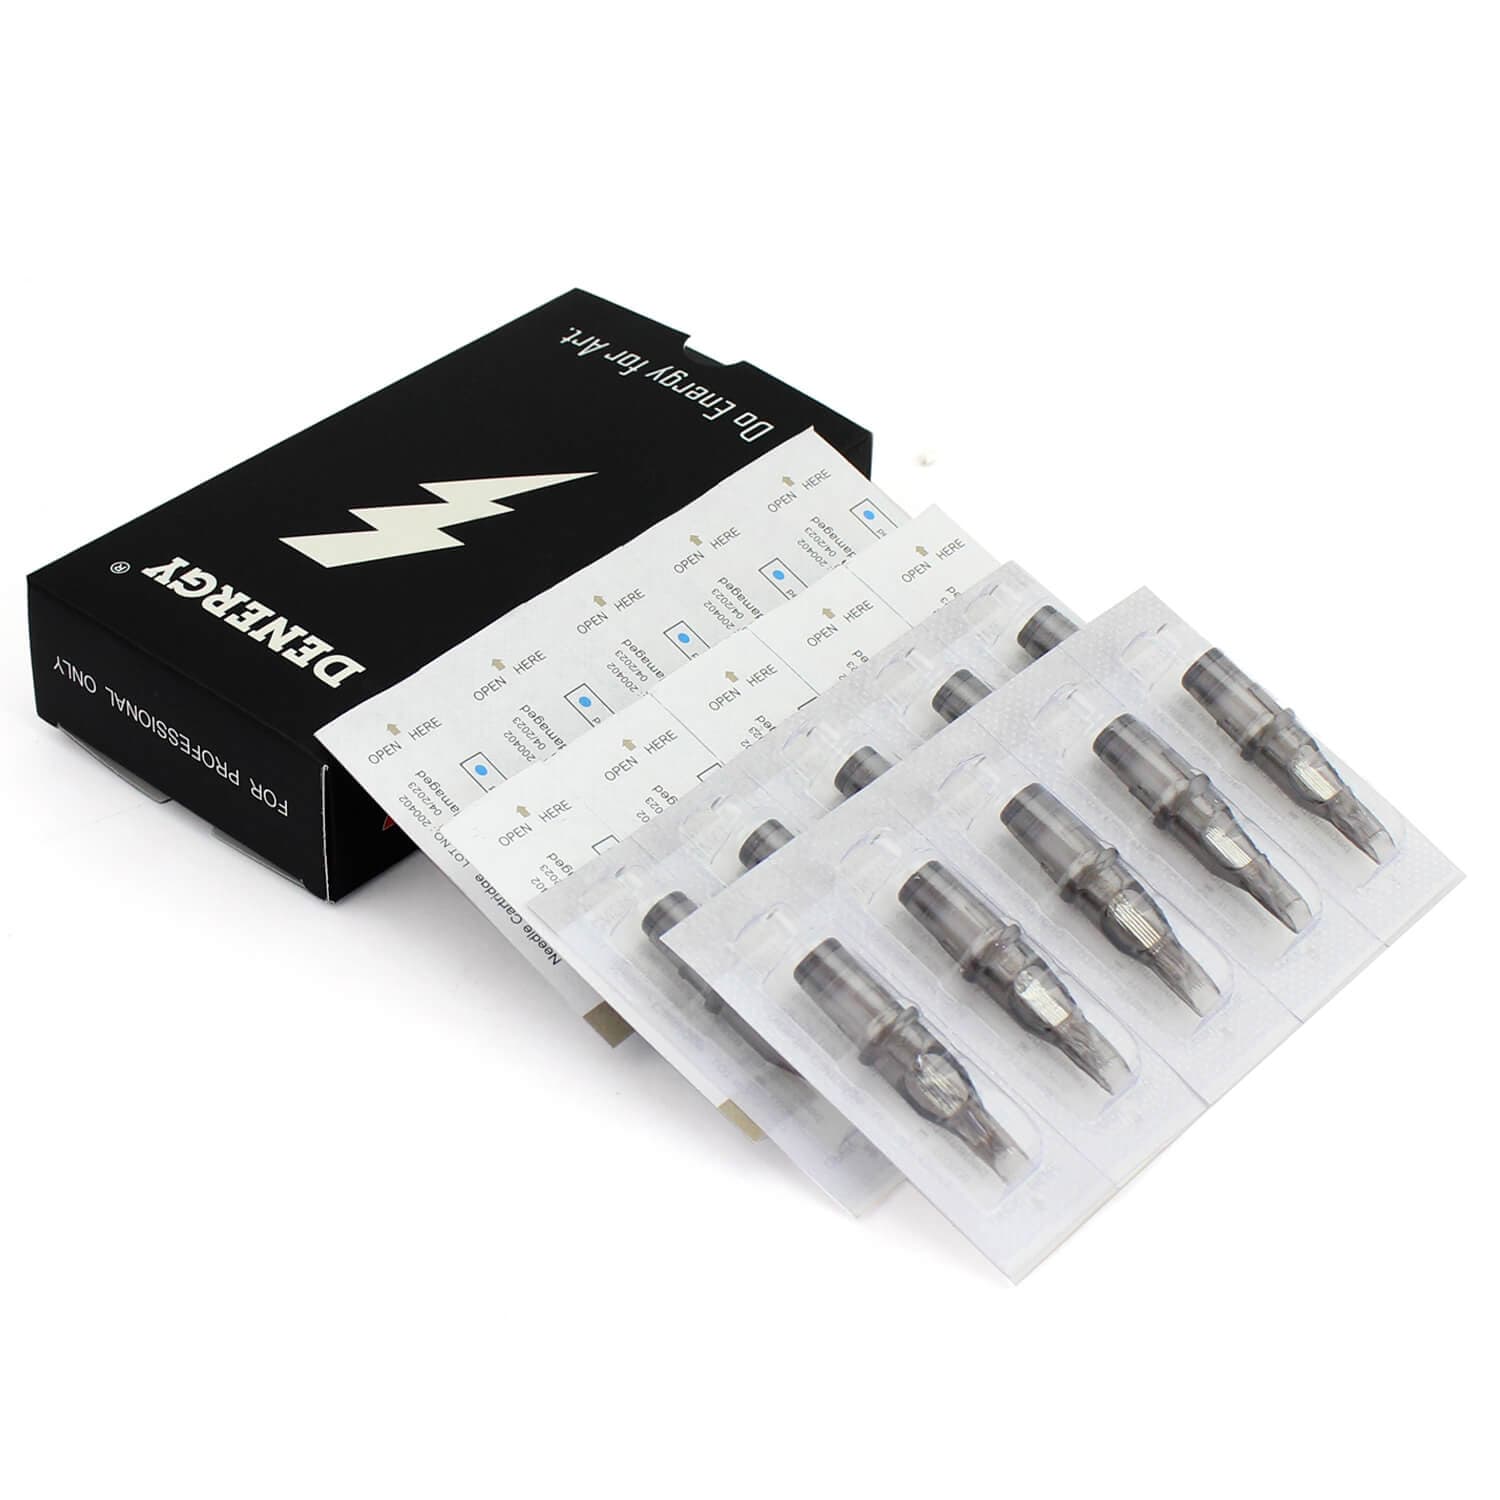 Buy Mumbai Tattoo Needles 11M1,13M1,15M1,11M2,13M2 Orange Mix Box  Disposable Magnum Liner, Magnum Shader Without Nipple (Pack of 50) Online  at Low Prices in India - Amazon.in